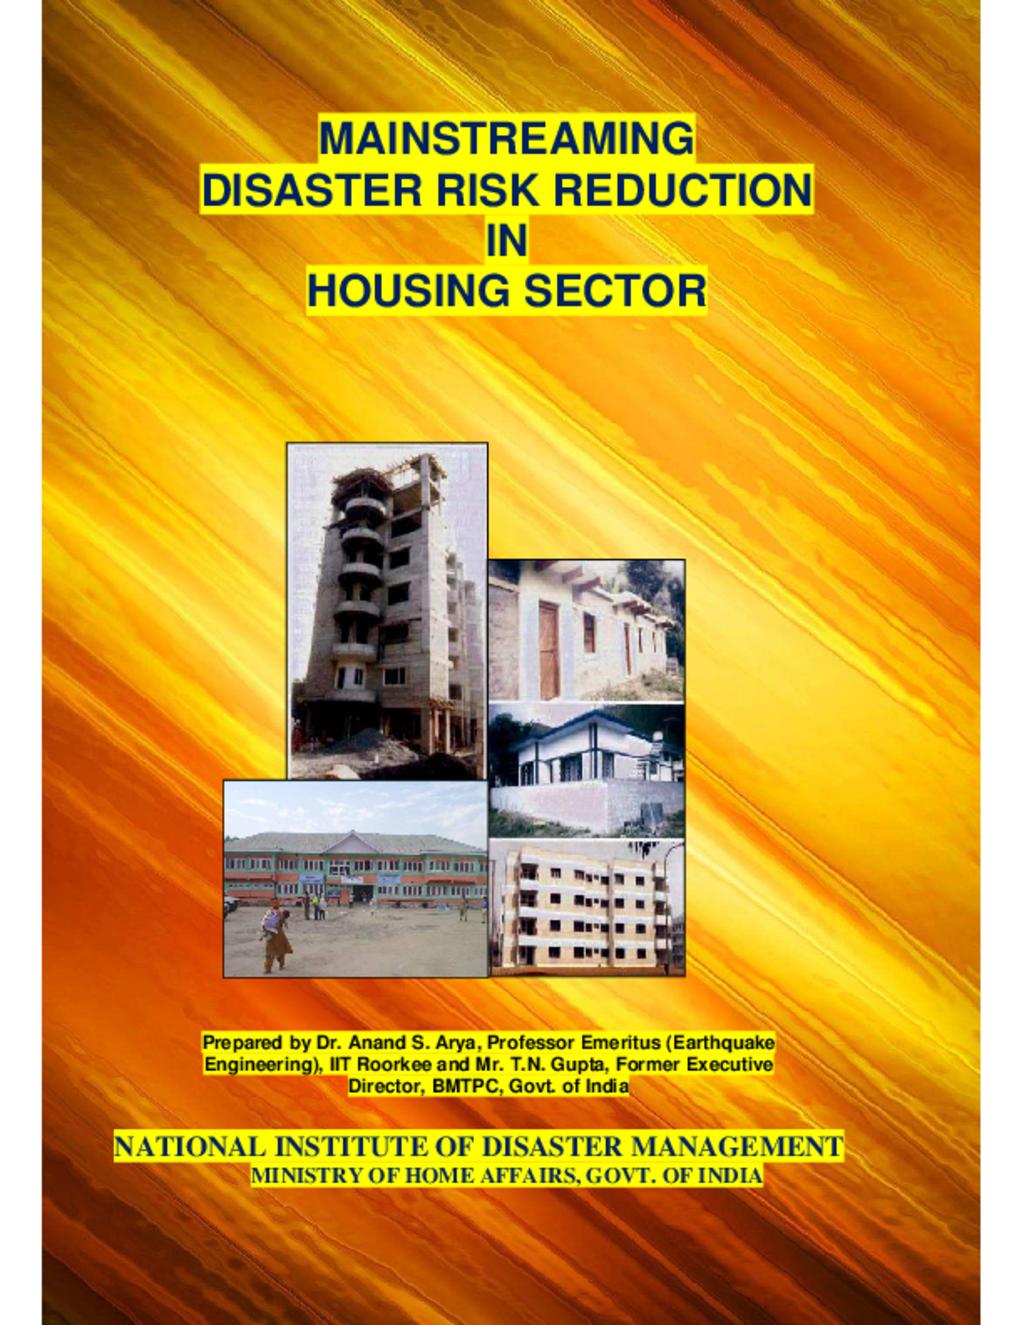 DRR and Housing